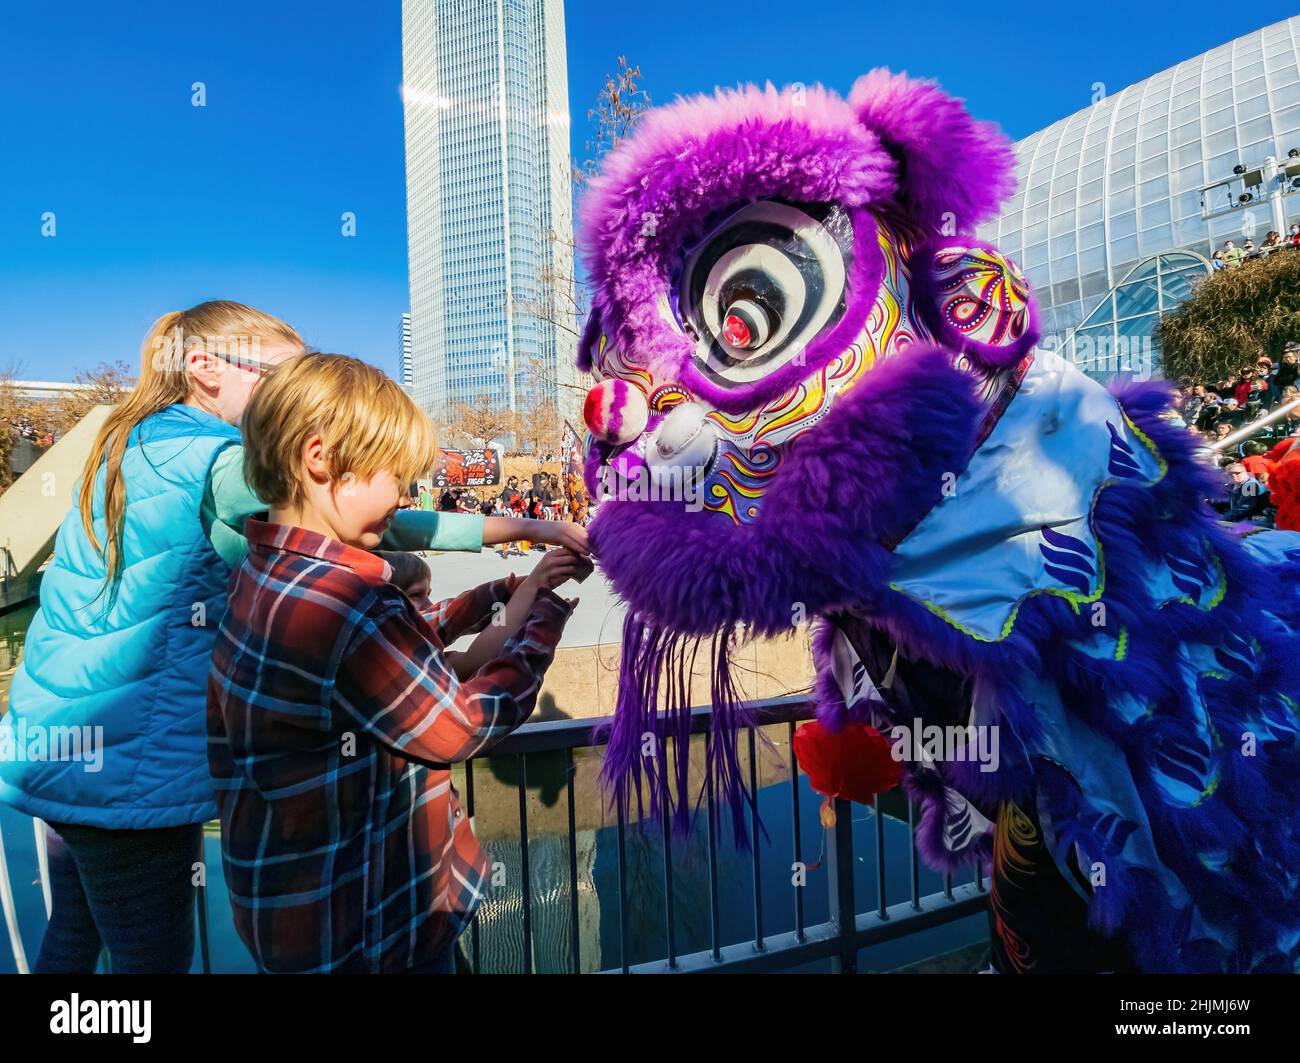 oklahoma-jan-29-2022-sunny-view-of-child-giving-money-to-the-lion-in-lunar-new-year-festival-2HJMJ6W.jpg